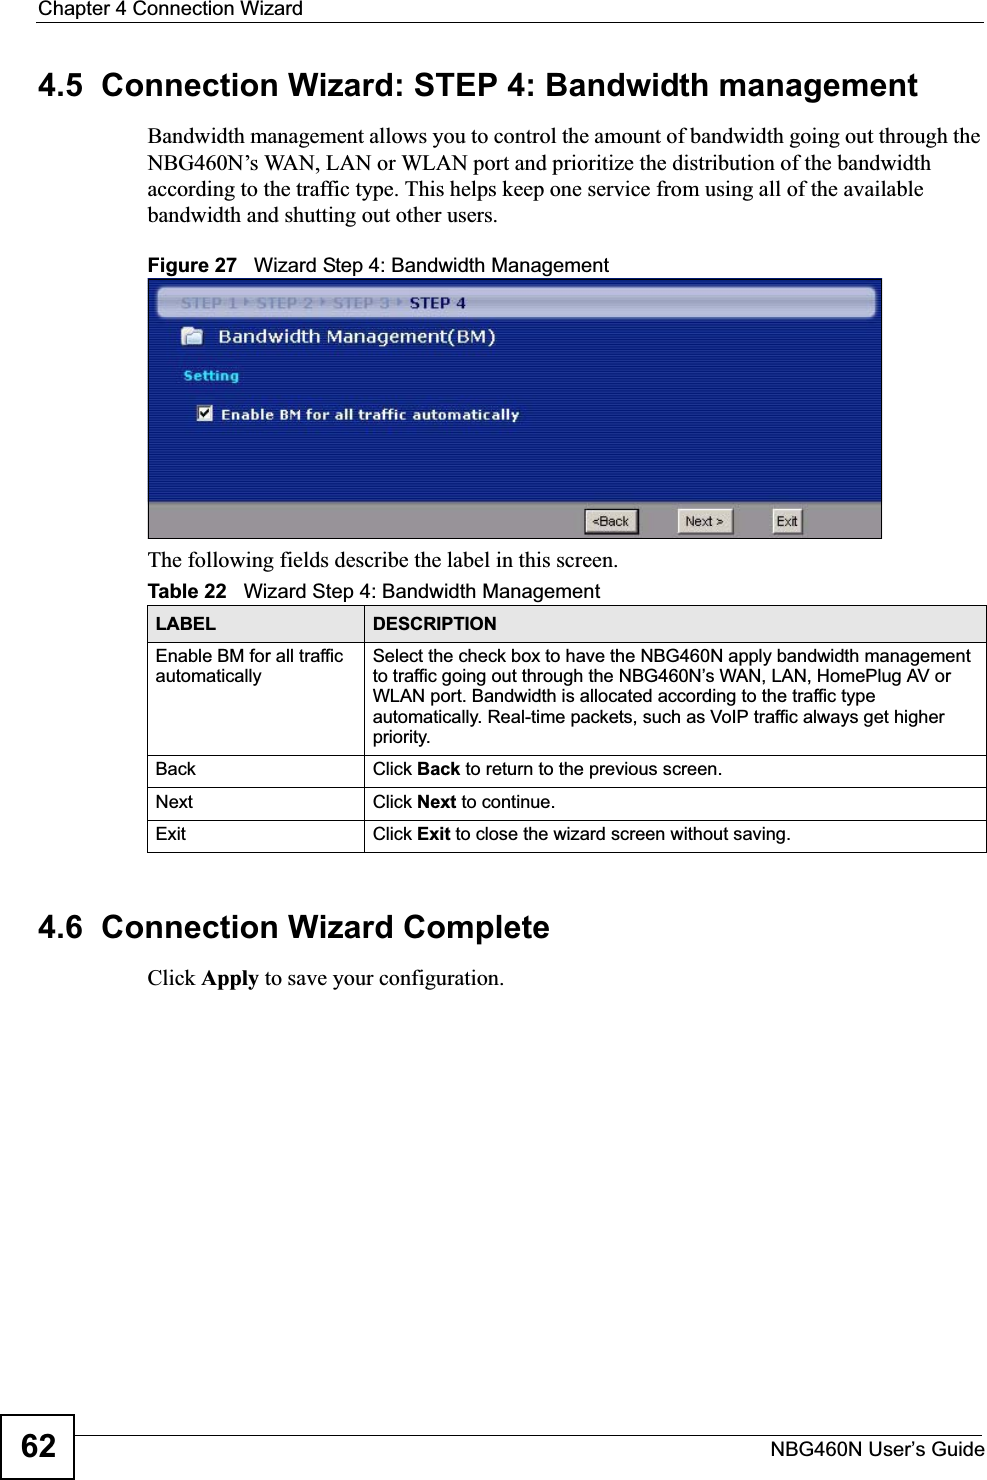 Chapter 4 Connection WizardNBG460N User’s Guide624.5  Connection Wizard: STEP 4: Bandwidth managementBandwidth management allows you to control the amount of bandwidth going out through the NBG460N’s WAN, LAN or WLAN port and prioritize the distribution of the bandwidth according to the traffic type. This helps keep one service from using all of the available bandwidth and shutting out other users.Figure 27   Wizard Step 4: Bandwidth Management The following fields describe the label in this screen.4.6  Connection Wizard CompleteClick Apply to save your configuration.Table 22   Wizard Step 4: Bandwidth ManagementLABEL DESCRIPTIONEnable BM for all traffic automaticallySelect the check box to have the NBG460N apply bandwidth management to traffic going out through the NBG460N’s WAN, LAN, HomePlug AV or WLAN port. Bandwidth is allocated according to the traffic type automatically. Real-time packets, such as VoIP traffic always get higher priority.Back Click Back to return to the previous screen.Next Click Next to continue. Exit Click Exit to close the wizard screen without saving.